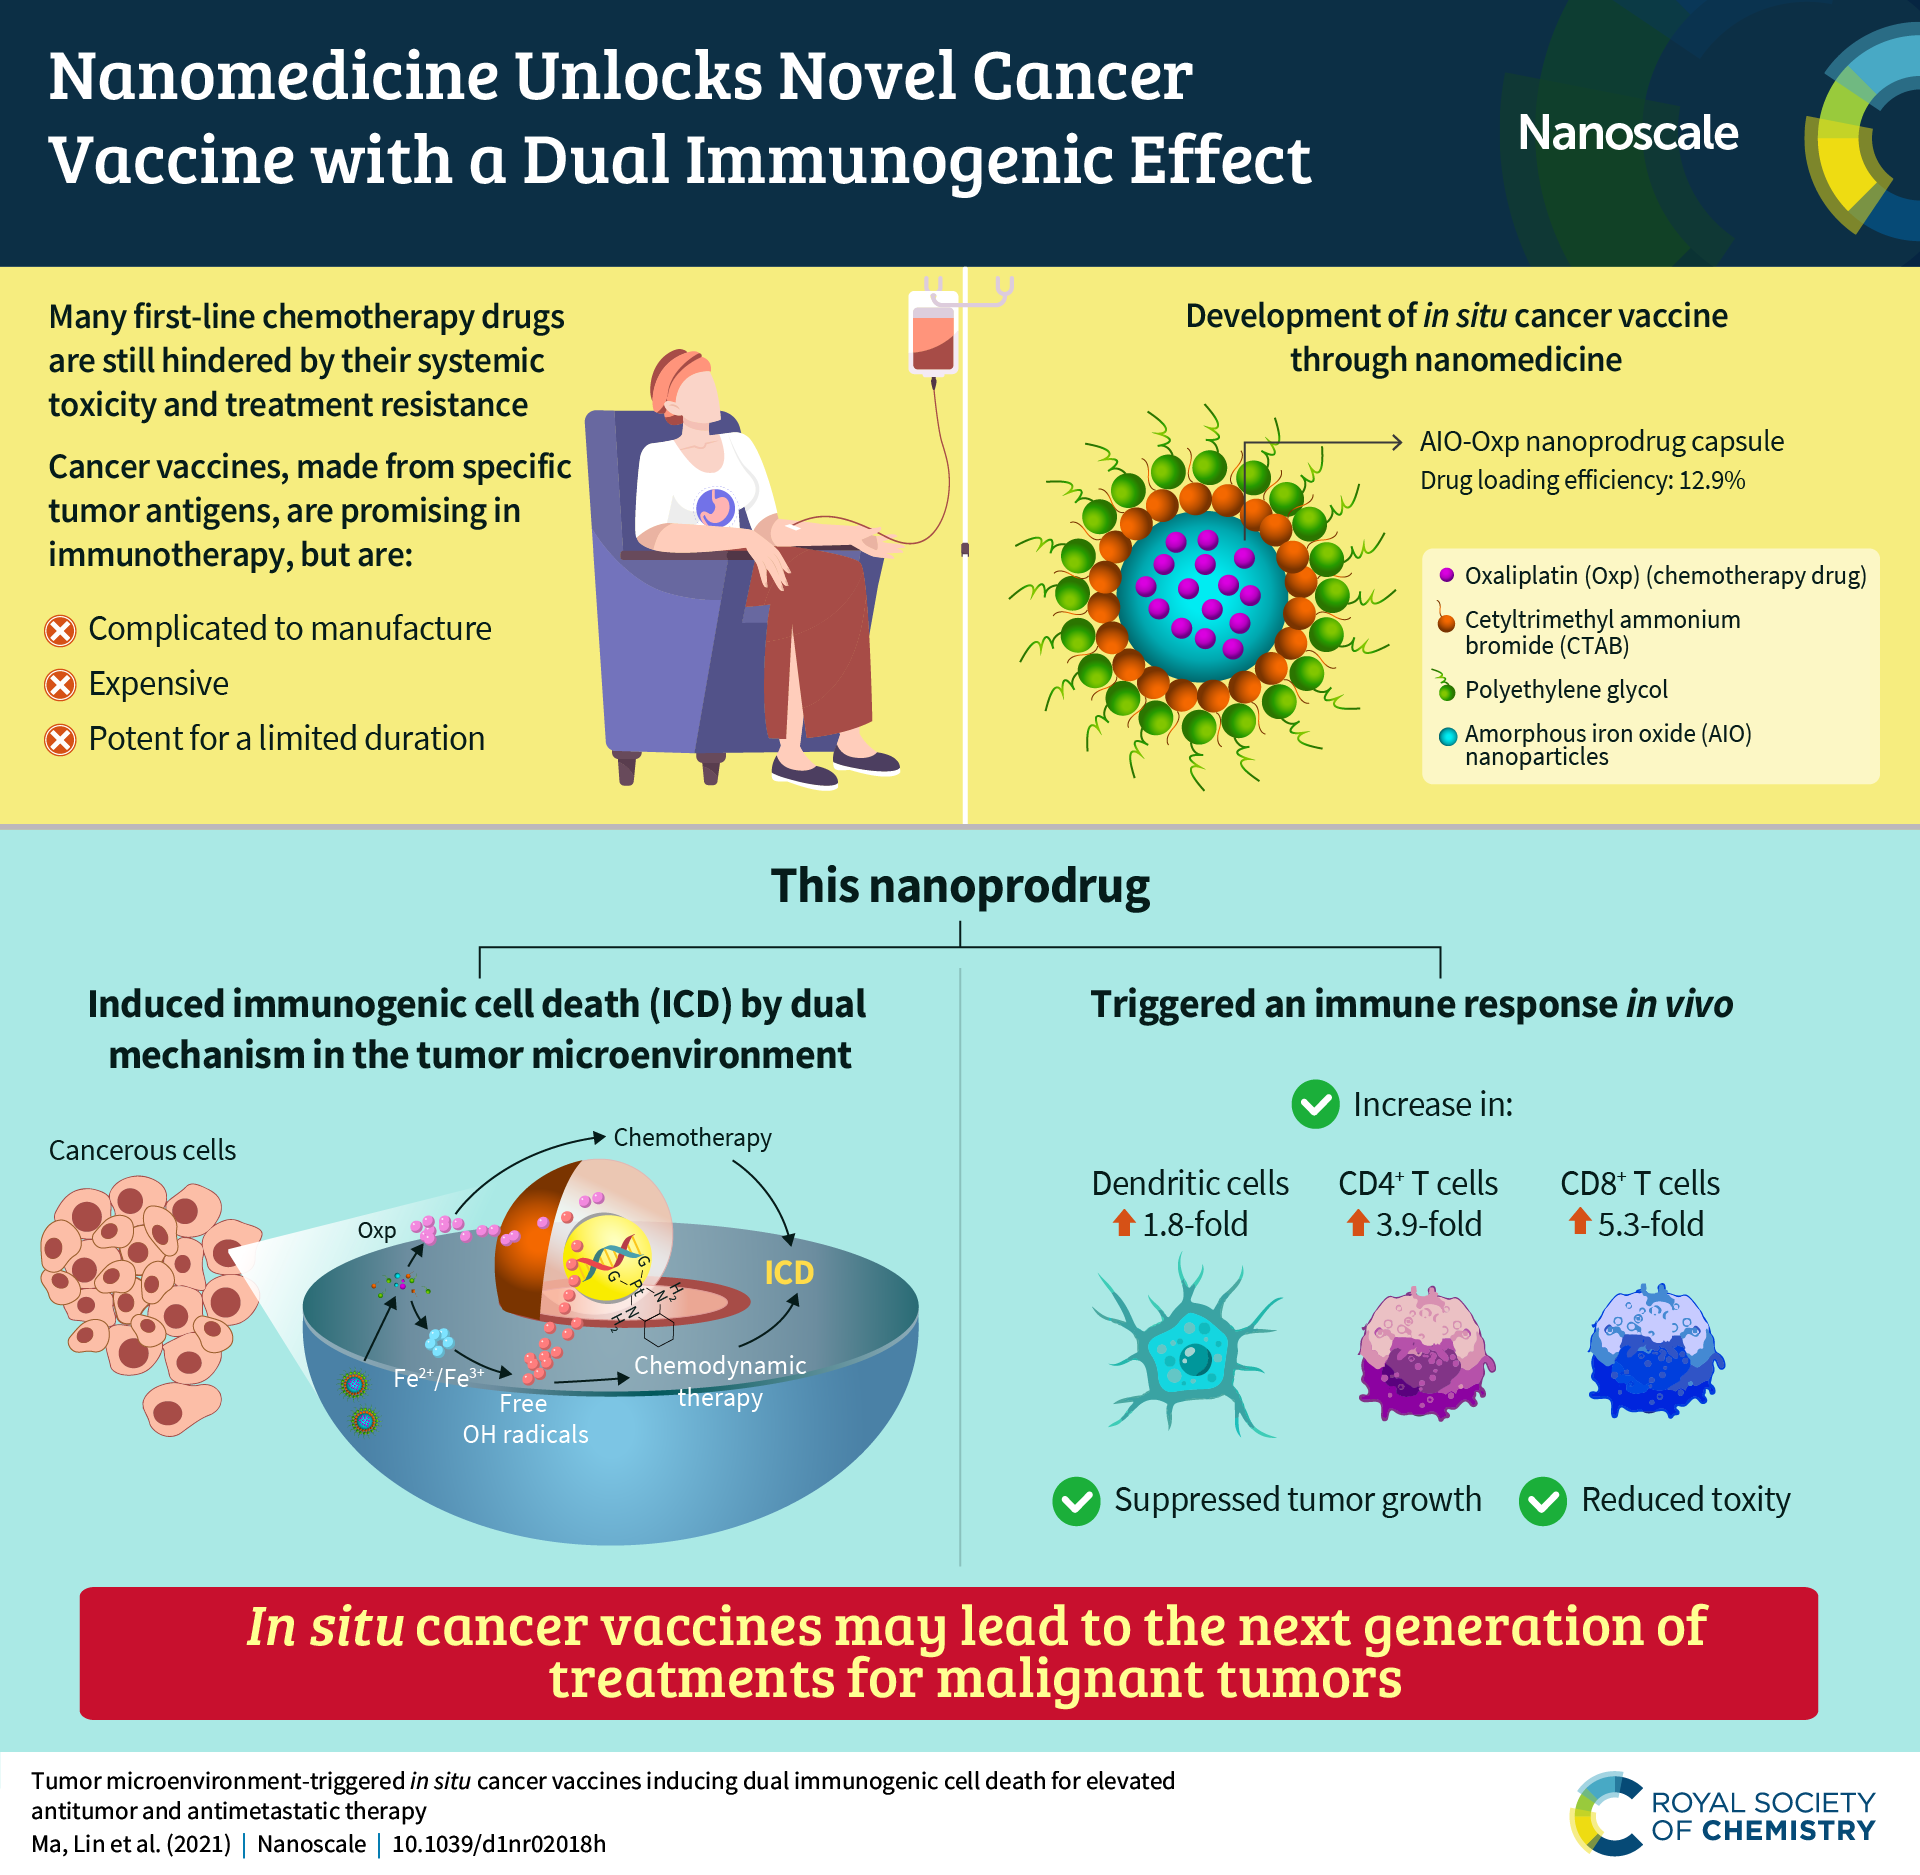 An infographic summarising the content of the article “Tumor microenvironment-triggered in situ cancer vaccines inducing dual immunogenic cell death for elevated antitumor and antimetastatic therapy"